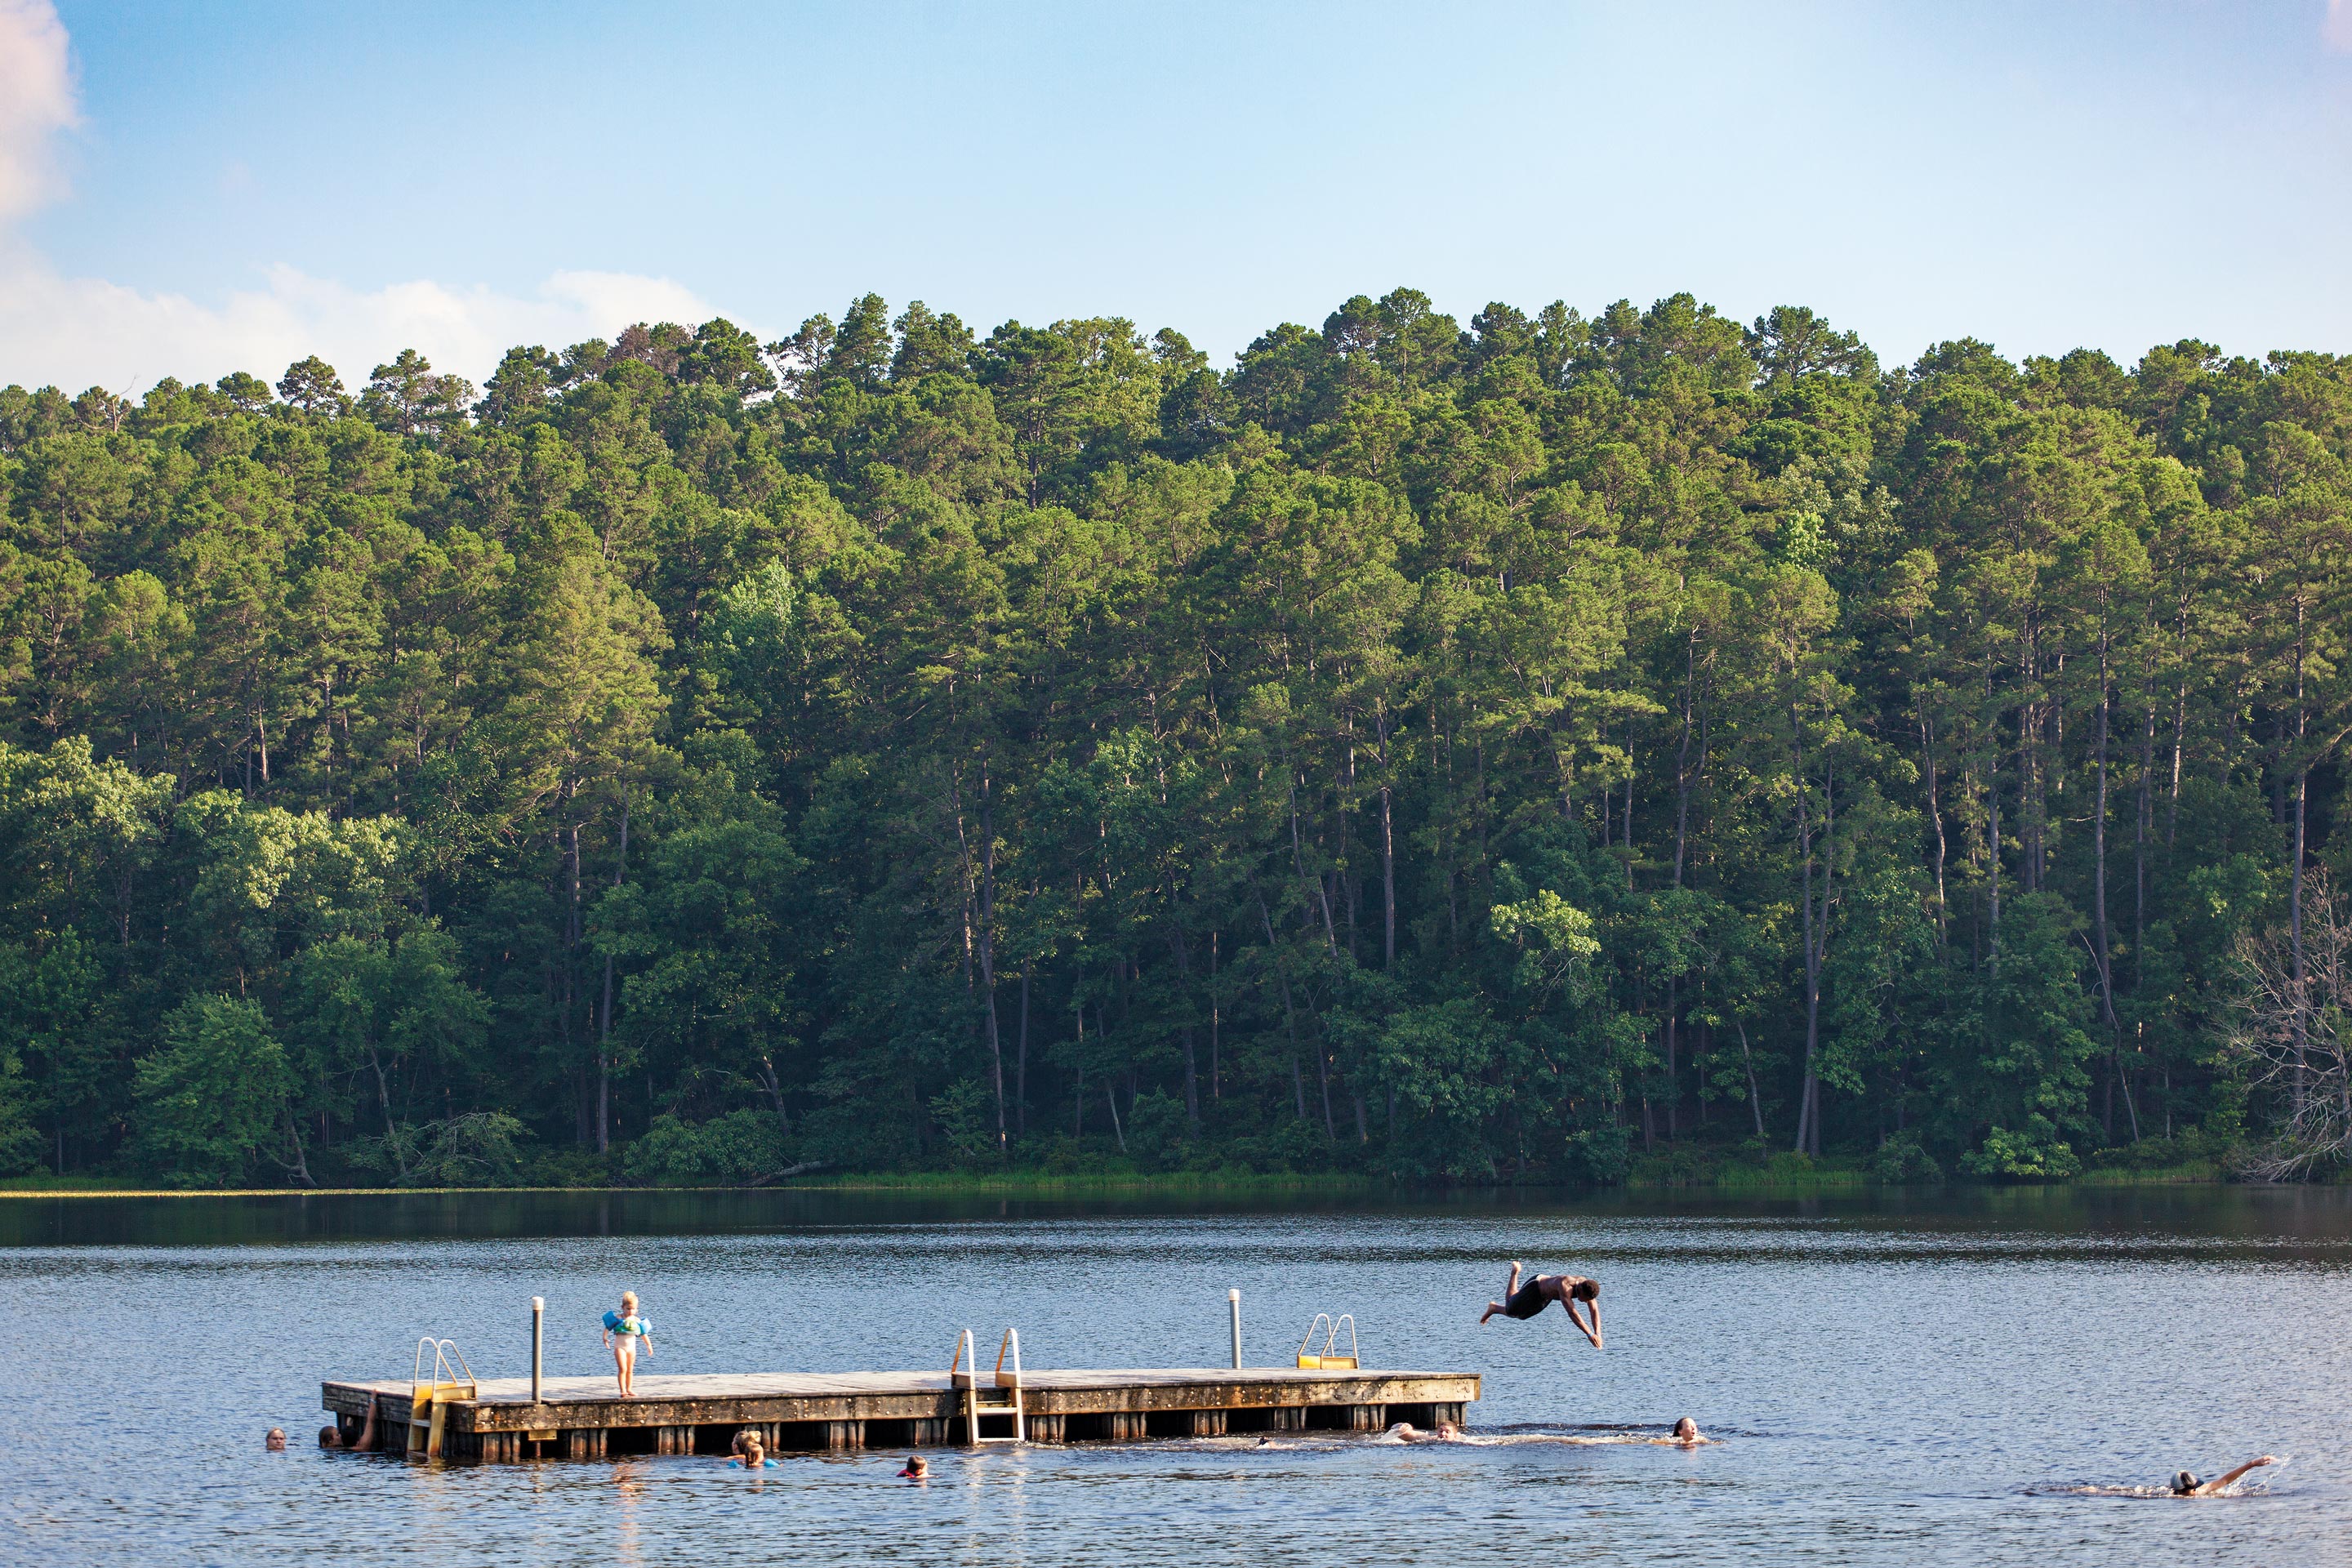 Kids dive into the lake at Daingerfield State Park